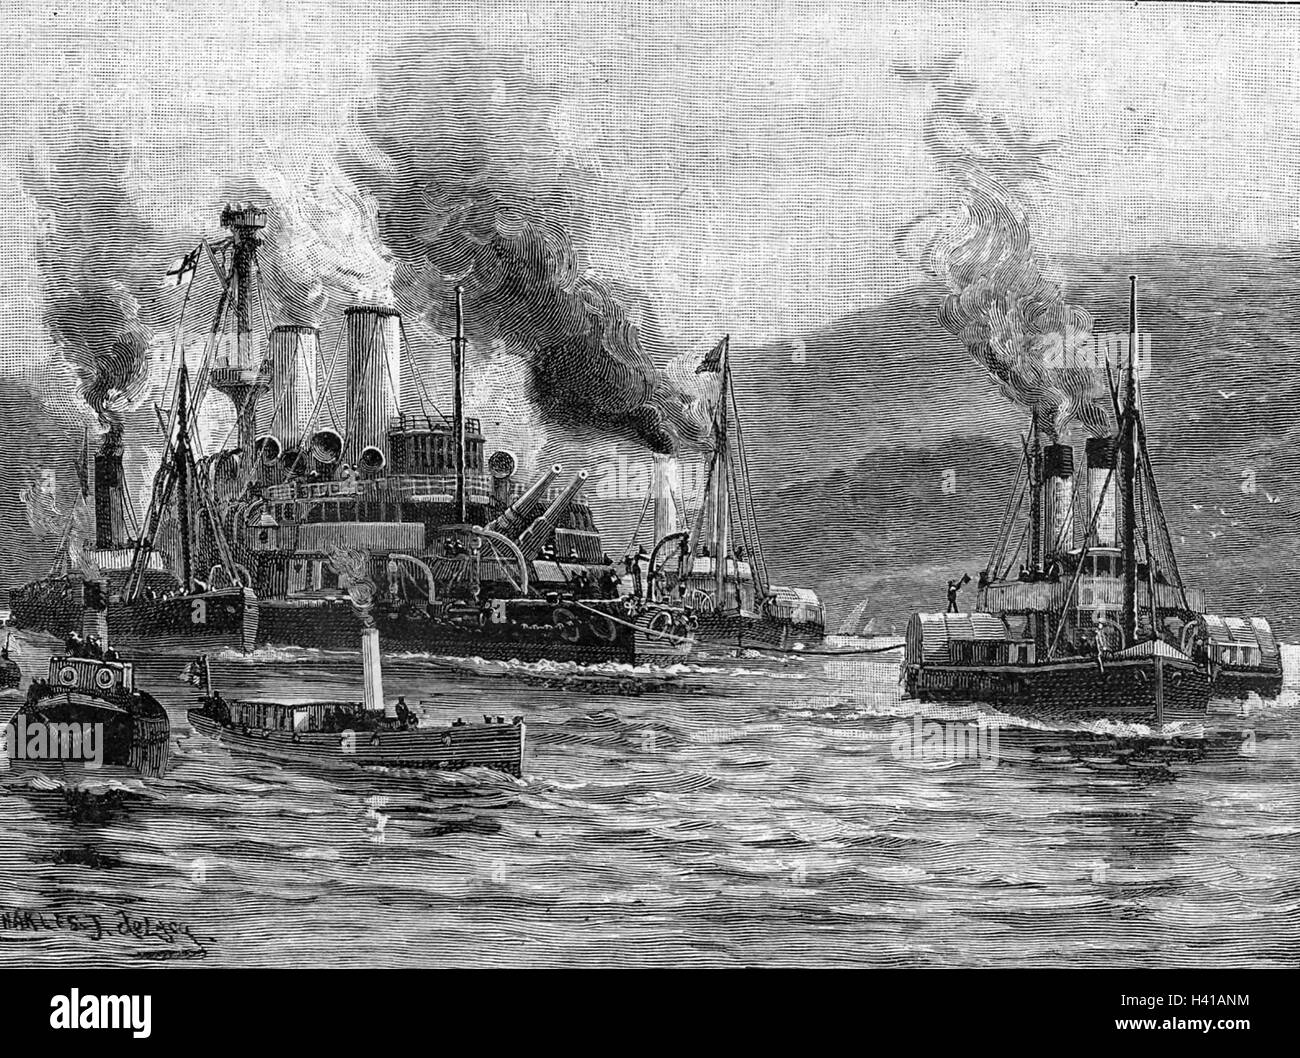 HMS HOWE battleship being towed into Ferrol harbour, Spain, 30 March 1893 after running aground on shoals on 2 November 1892 while serving with the Channel Fleet. Stock Photo